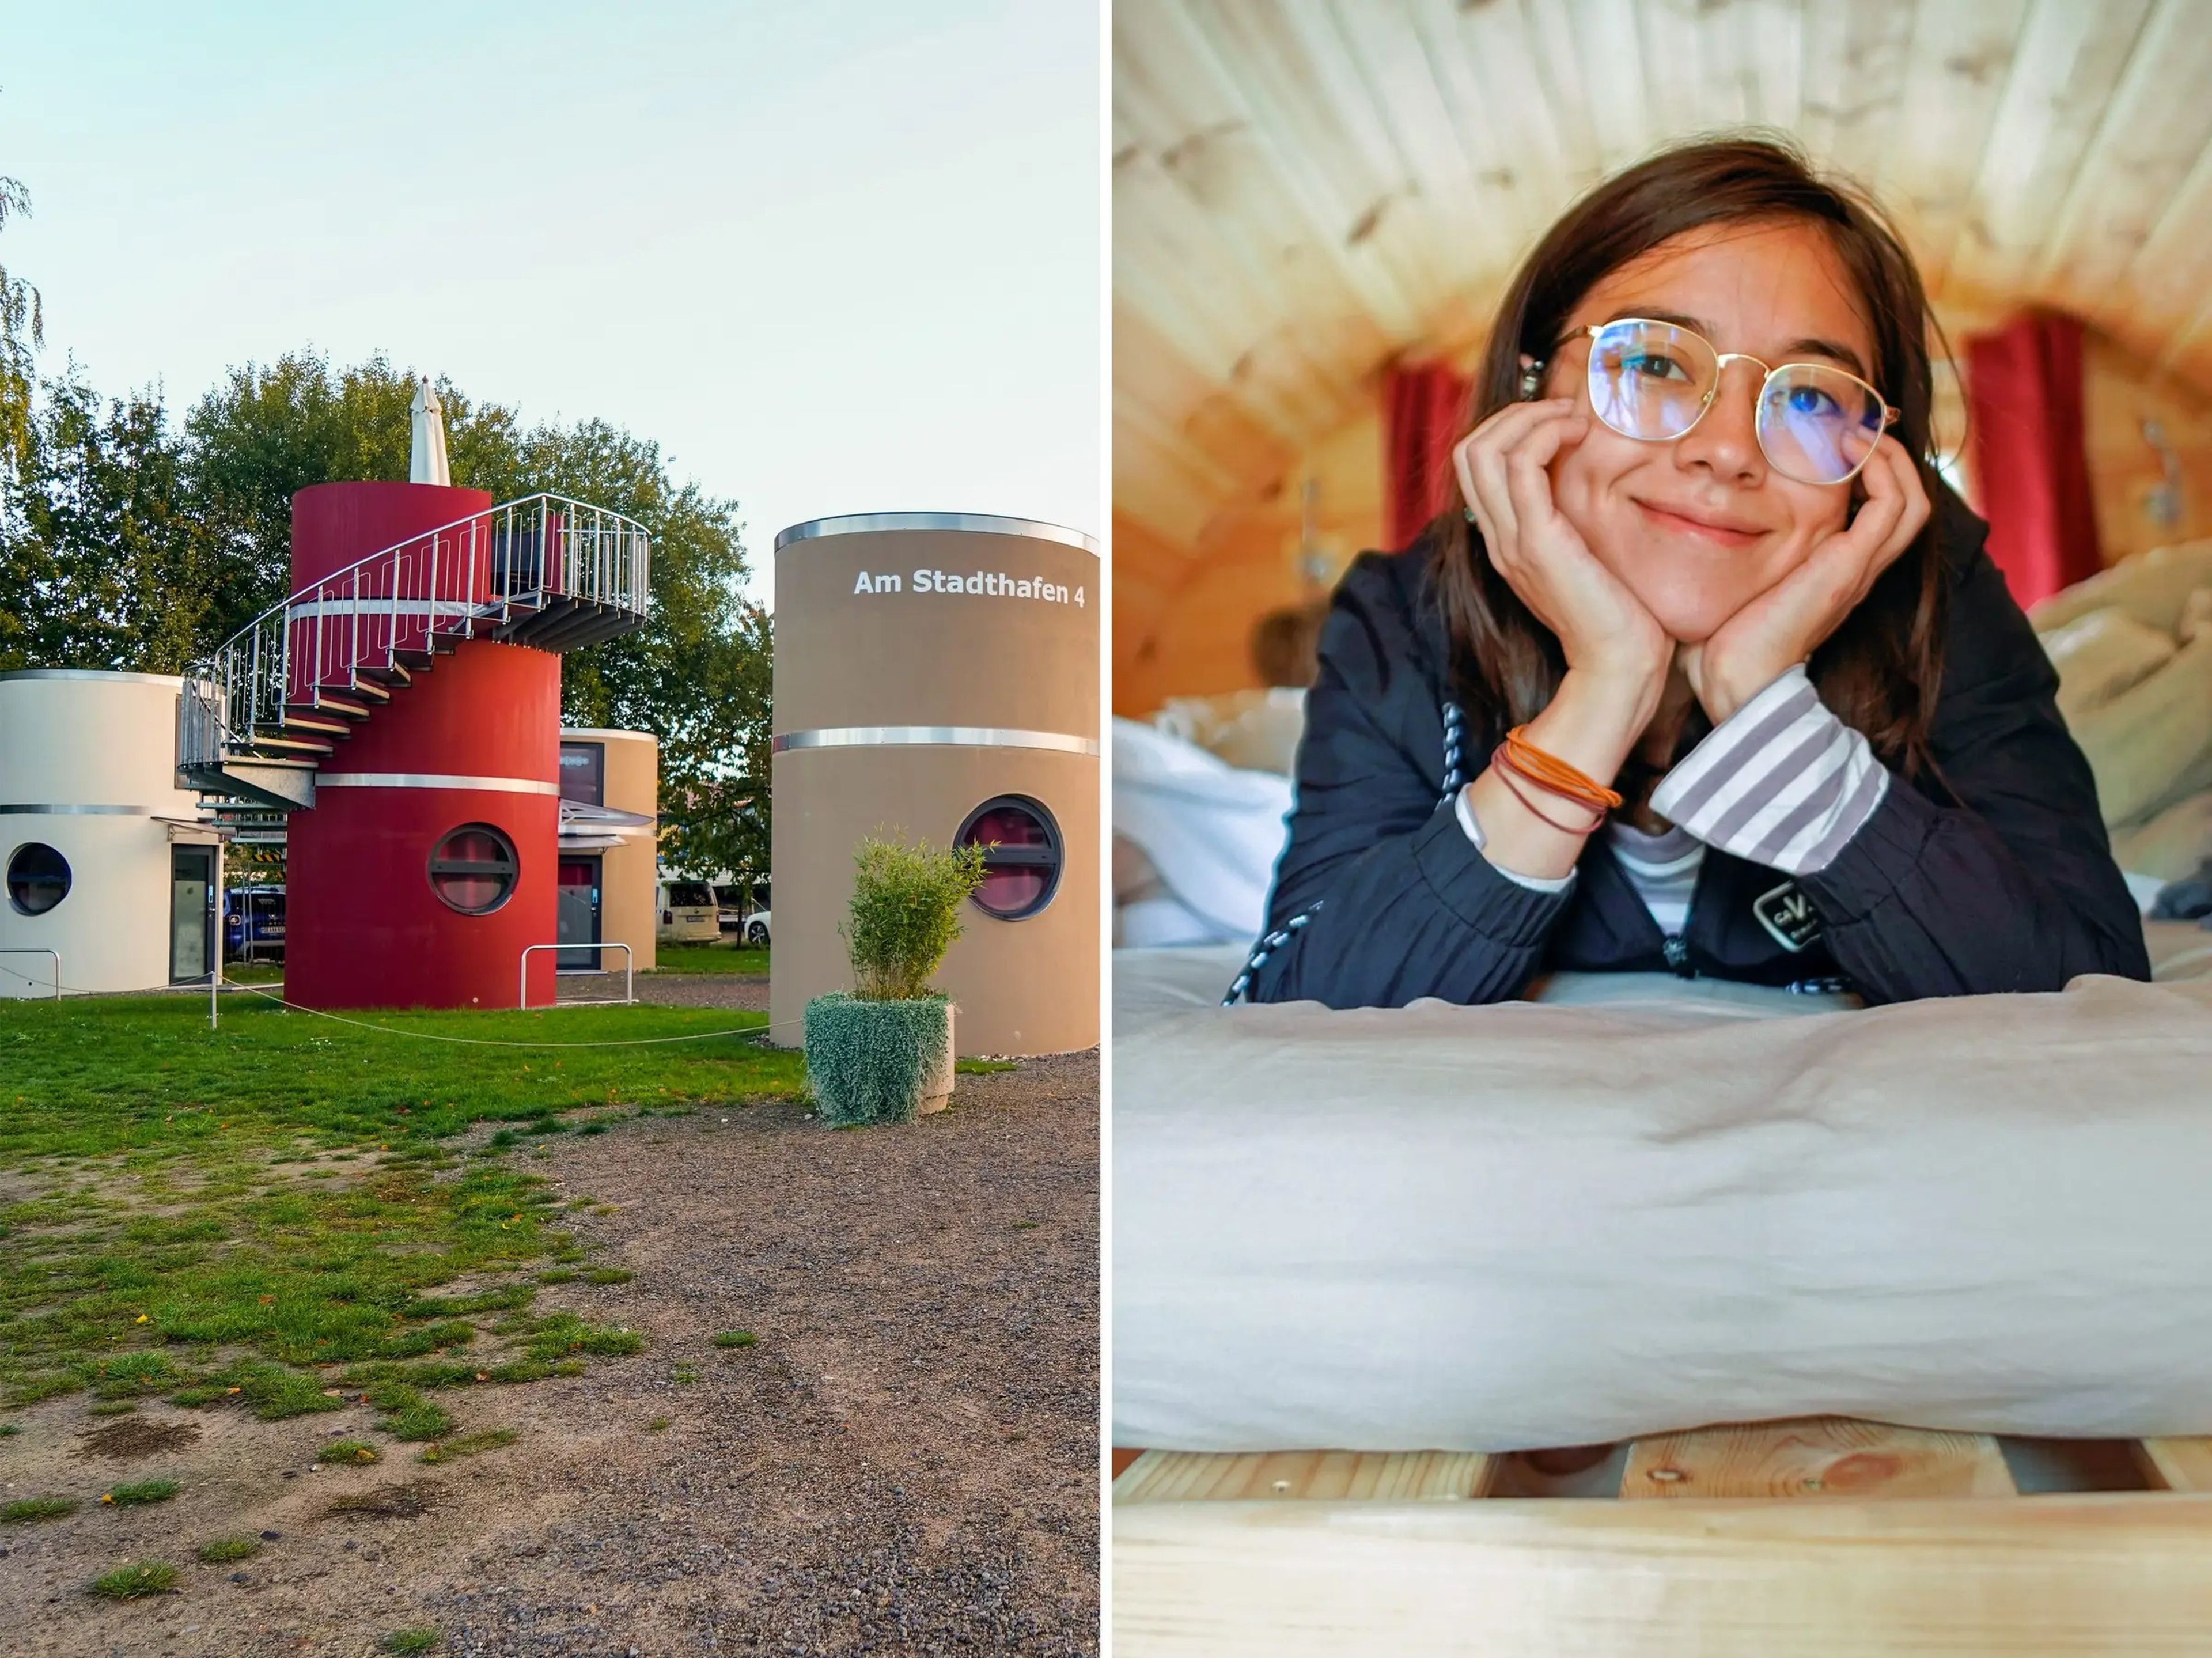 Insider's reporter has squeezed into tiny accommodations around the world, from sleeper train cabins to an airstream trailer.